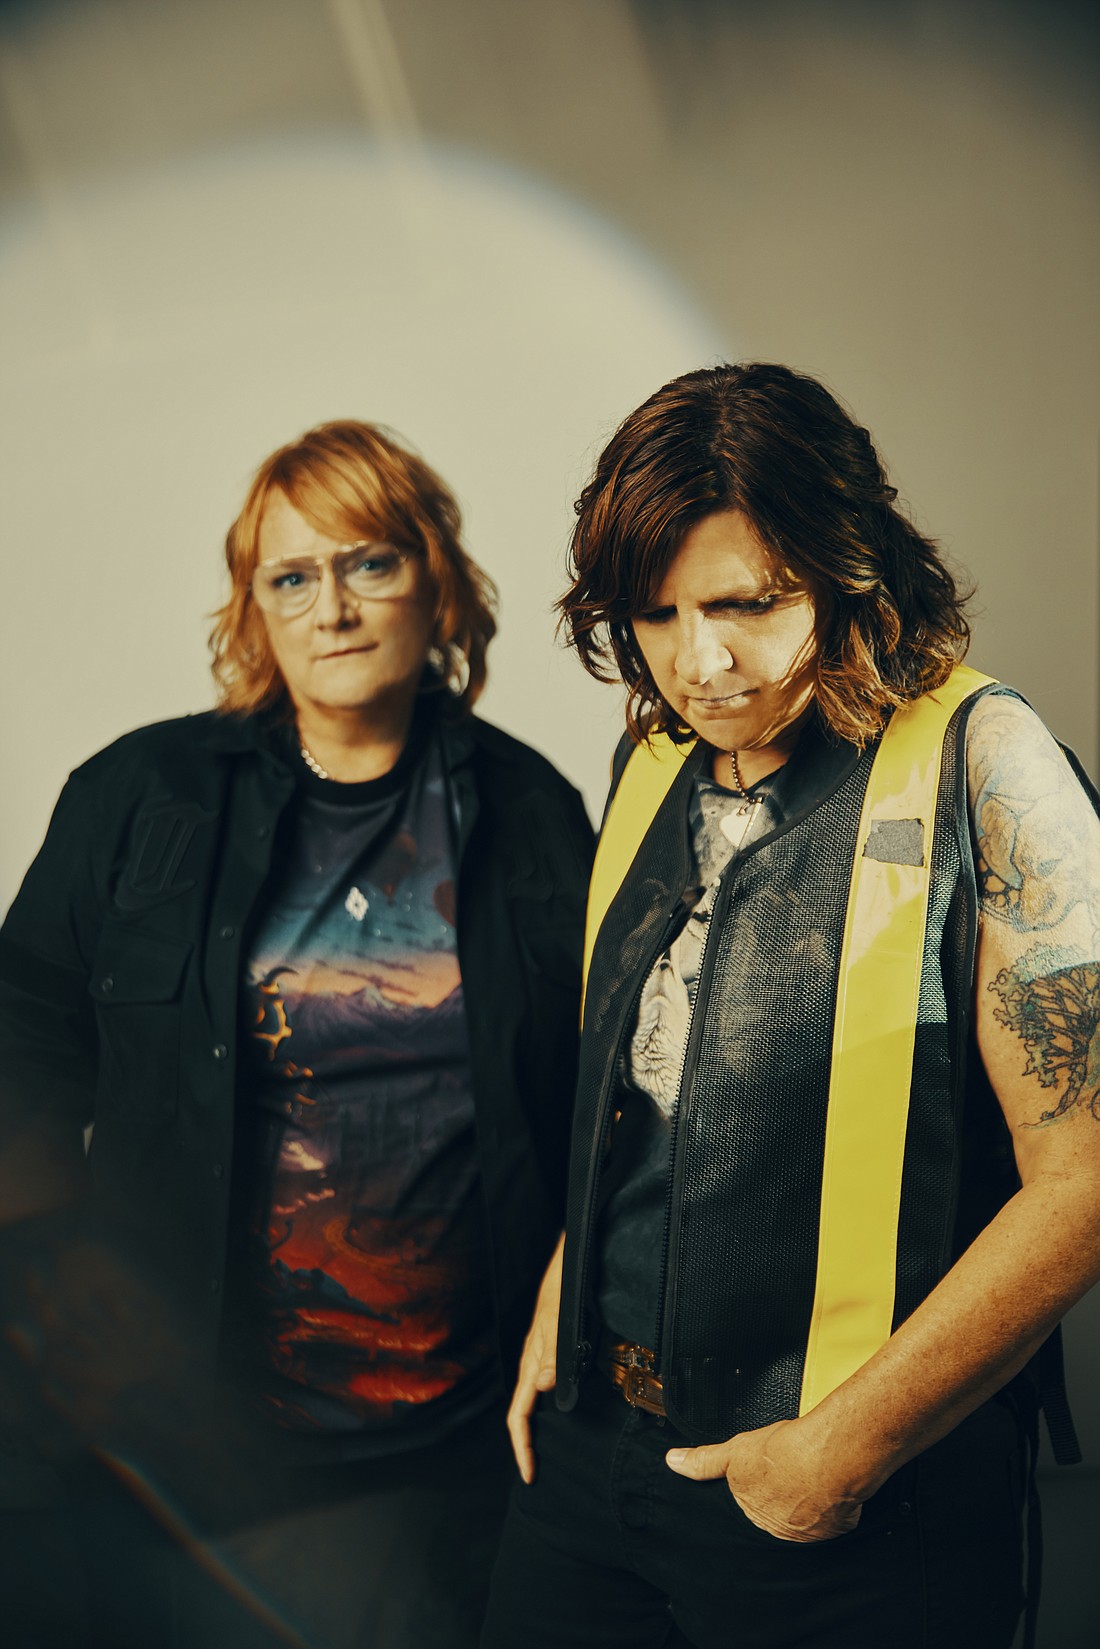 The Grammy award-wining folk and rock duo known as the Indigo Girls perform Tuesday, June 14 at the Mount Baker Theatre. Amy Ray and Emily Saliers will share songs from their latest studio album, “Look Long,” when they return to Bellingham.